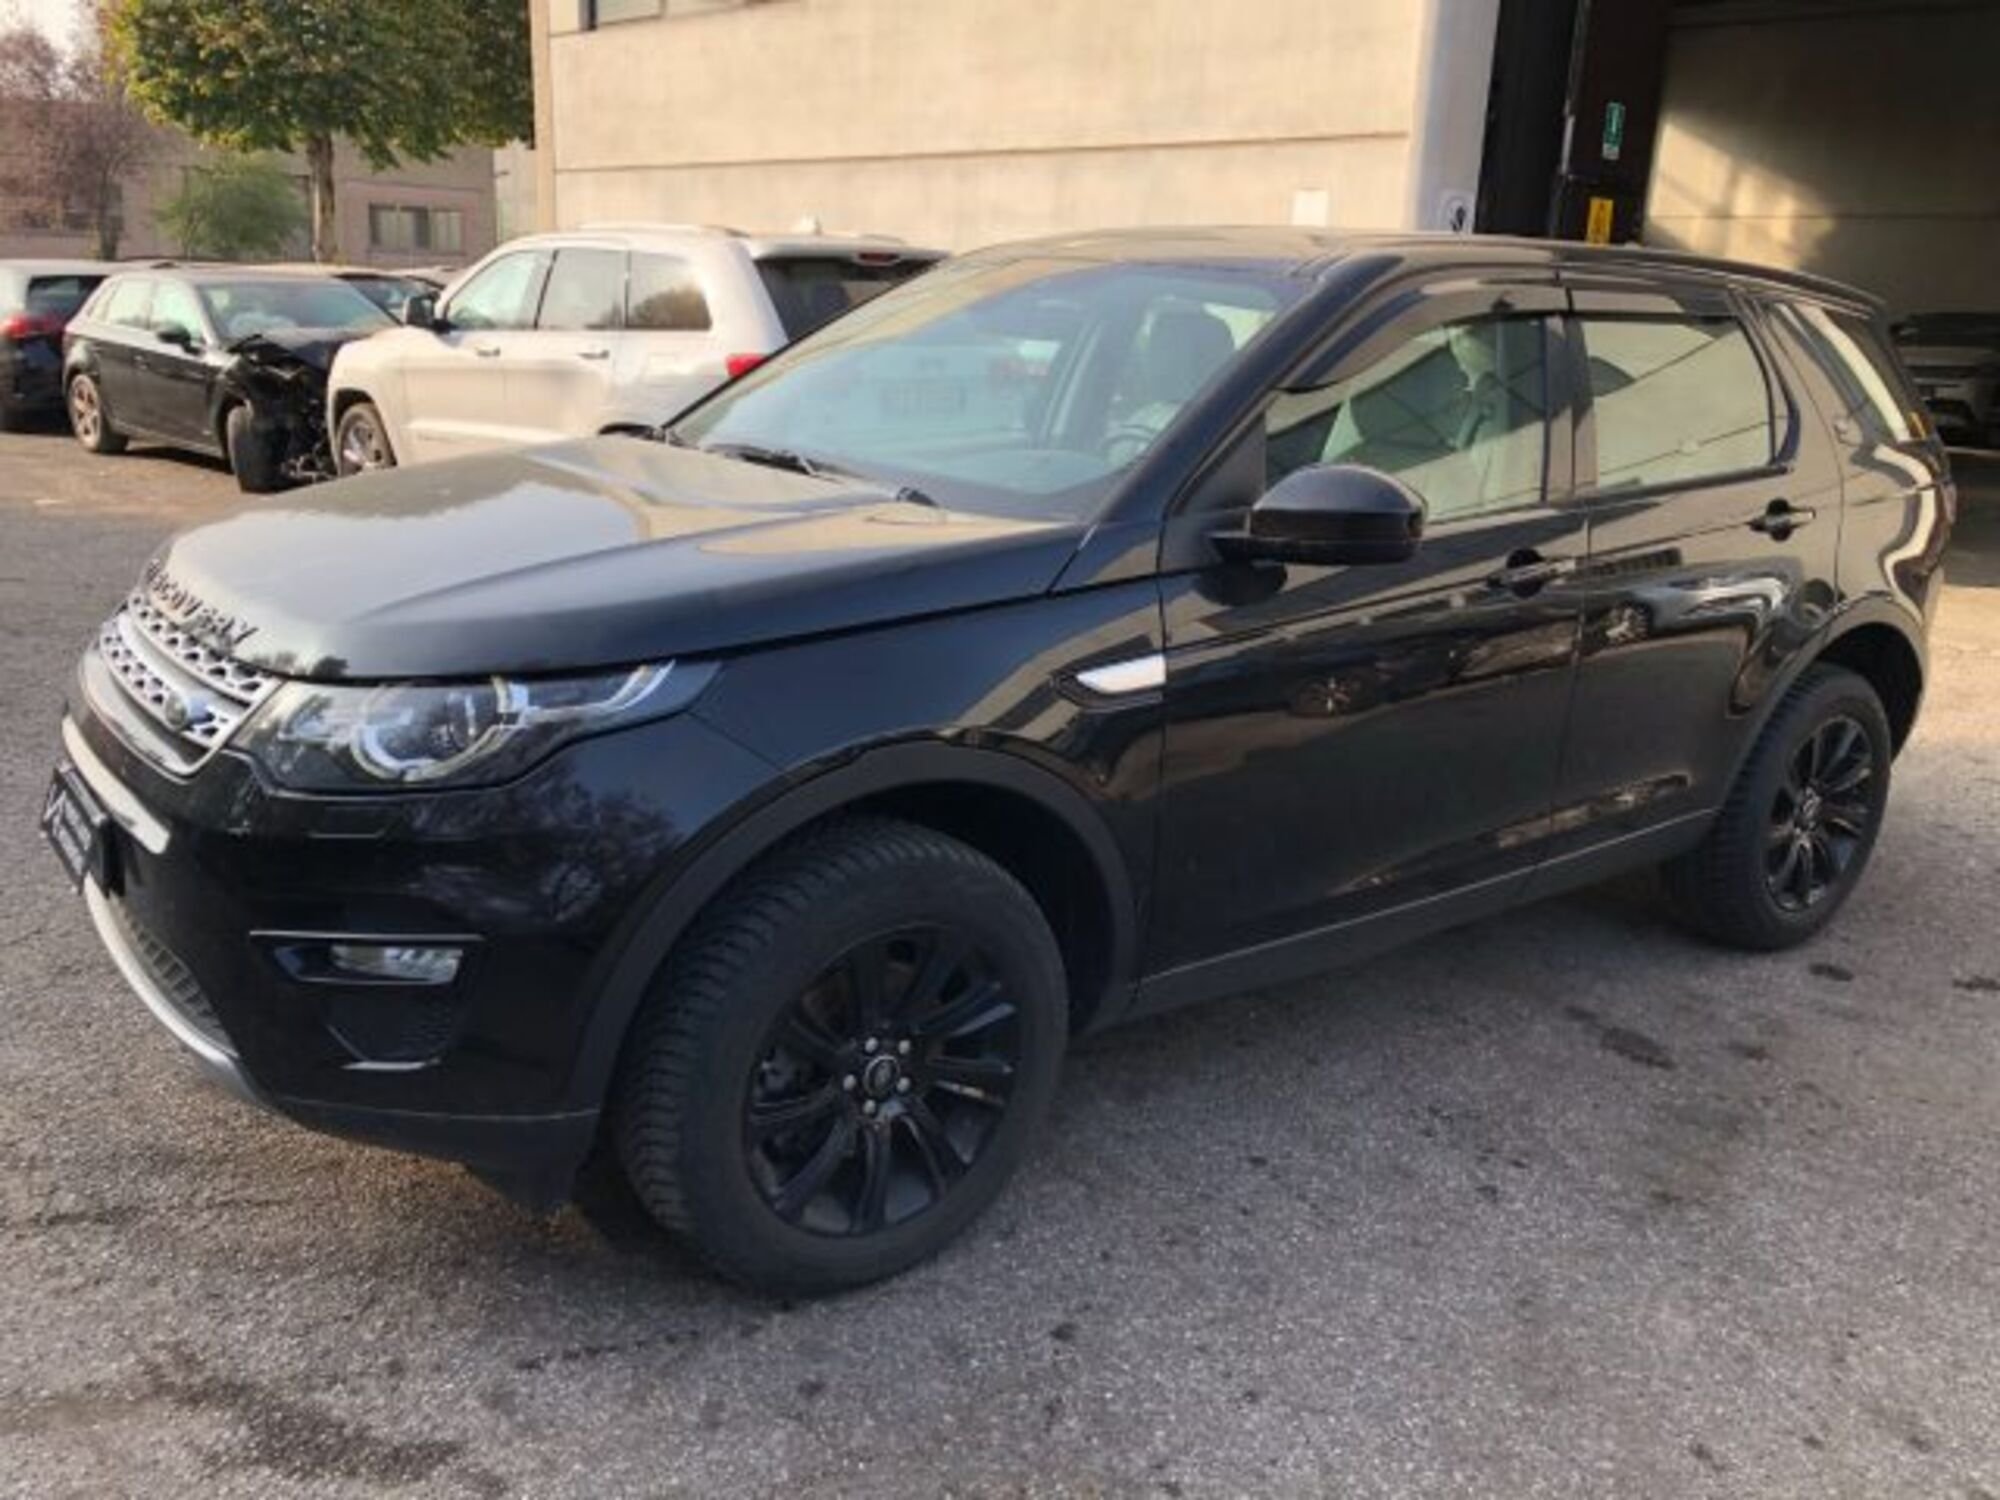 Land Rover Discovery Sport 2.0 TD4 180 CV HSE 